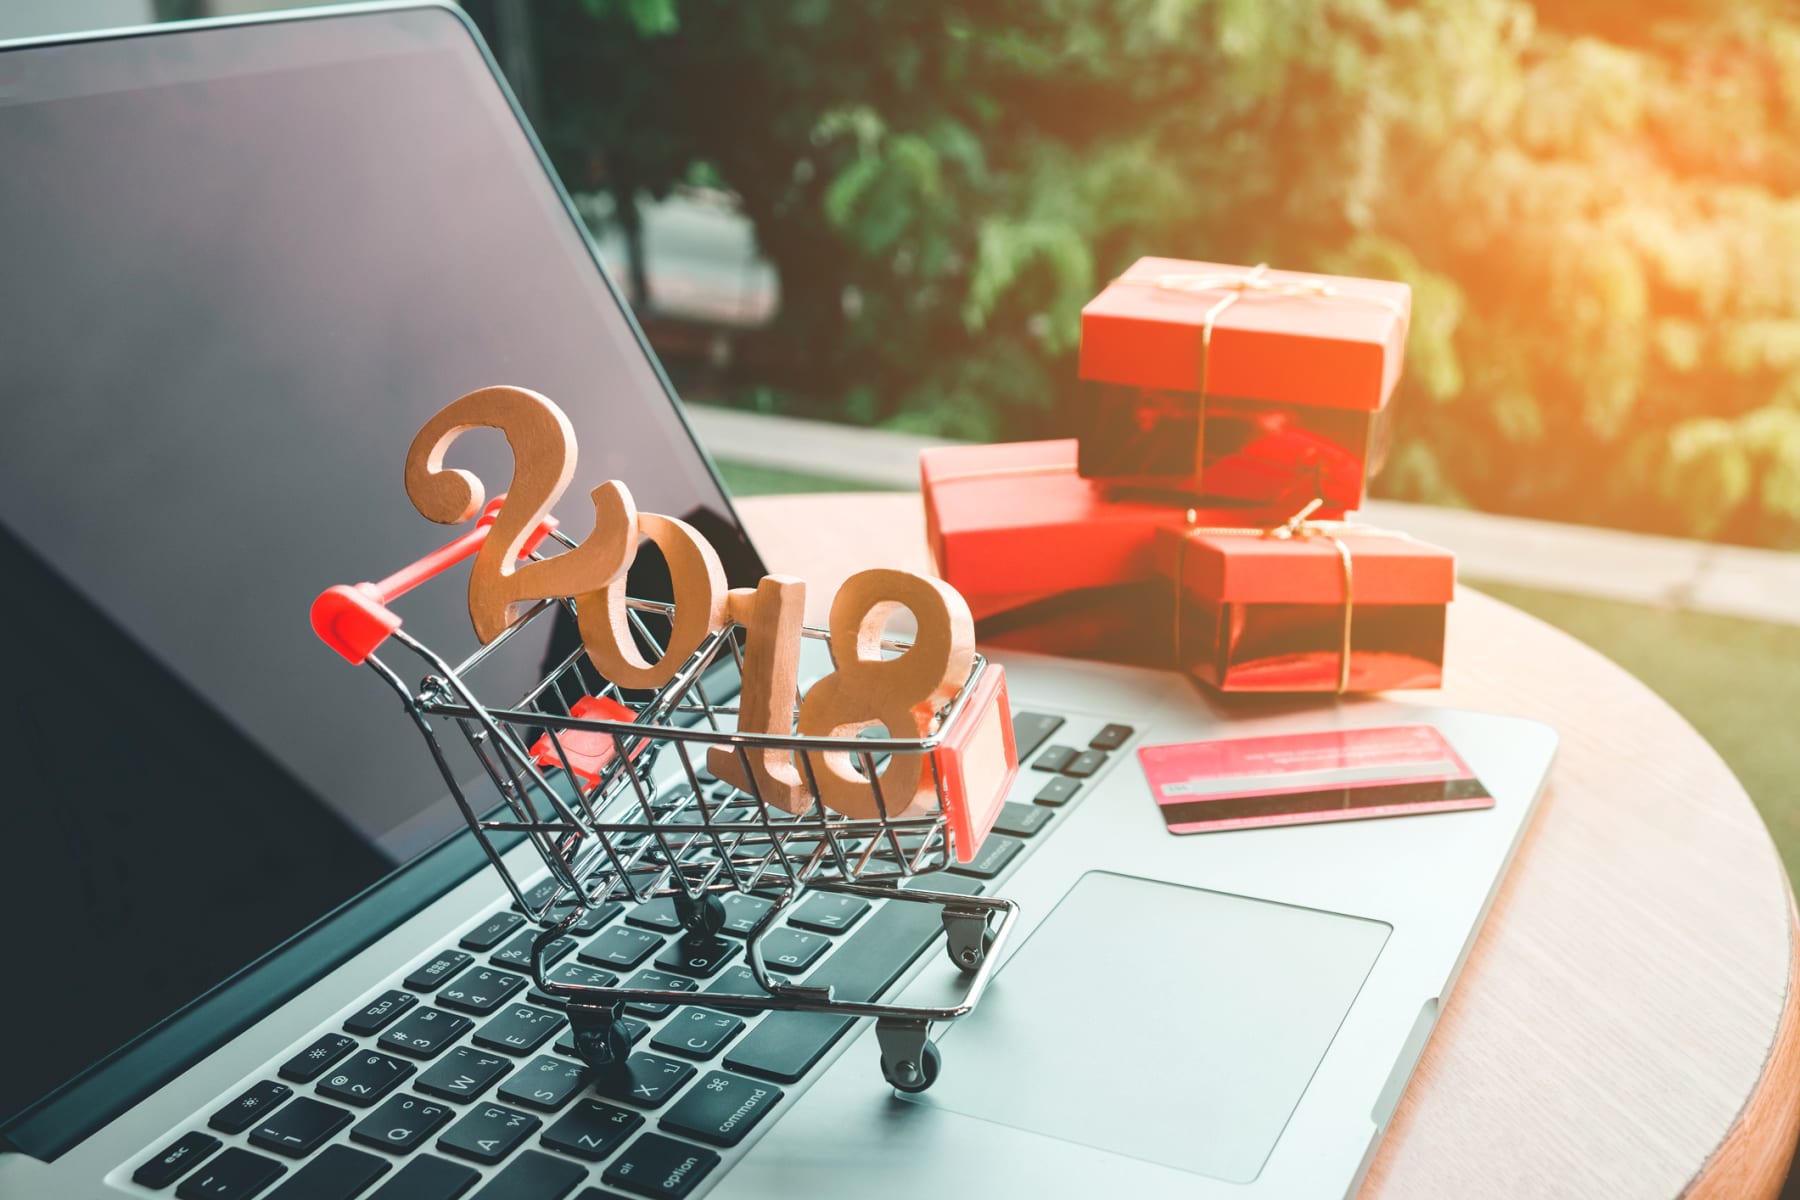 2018 Shopping Trends